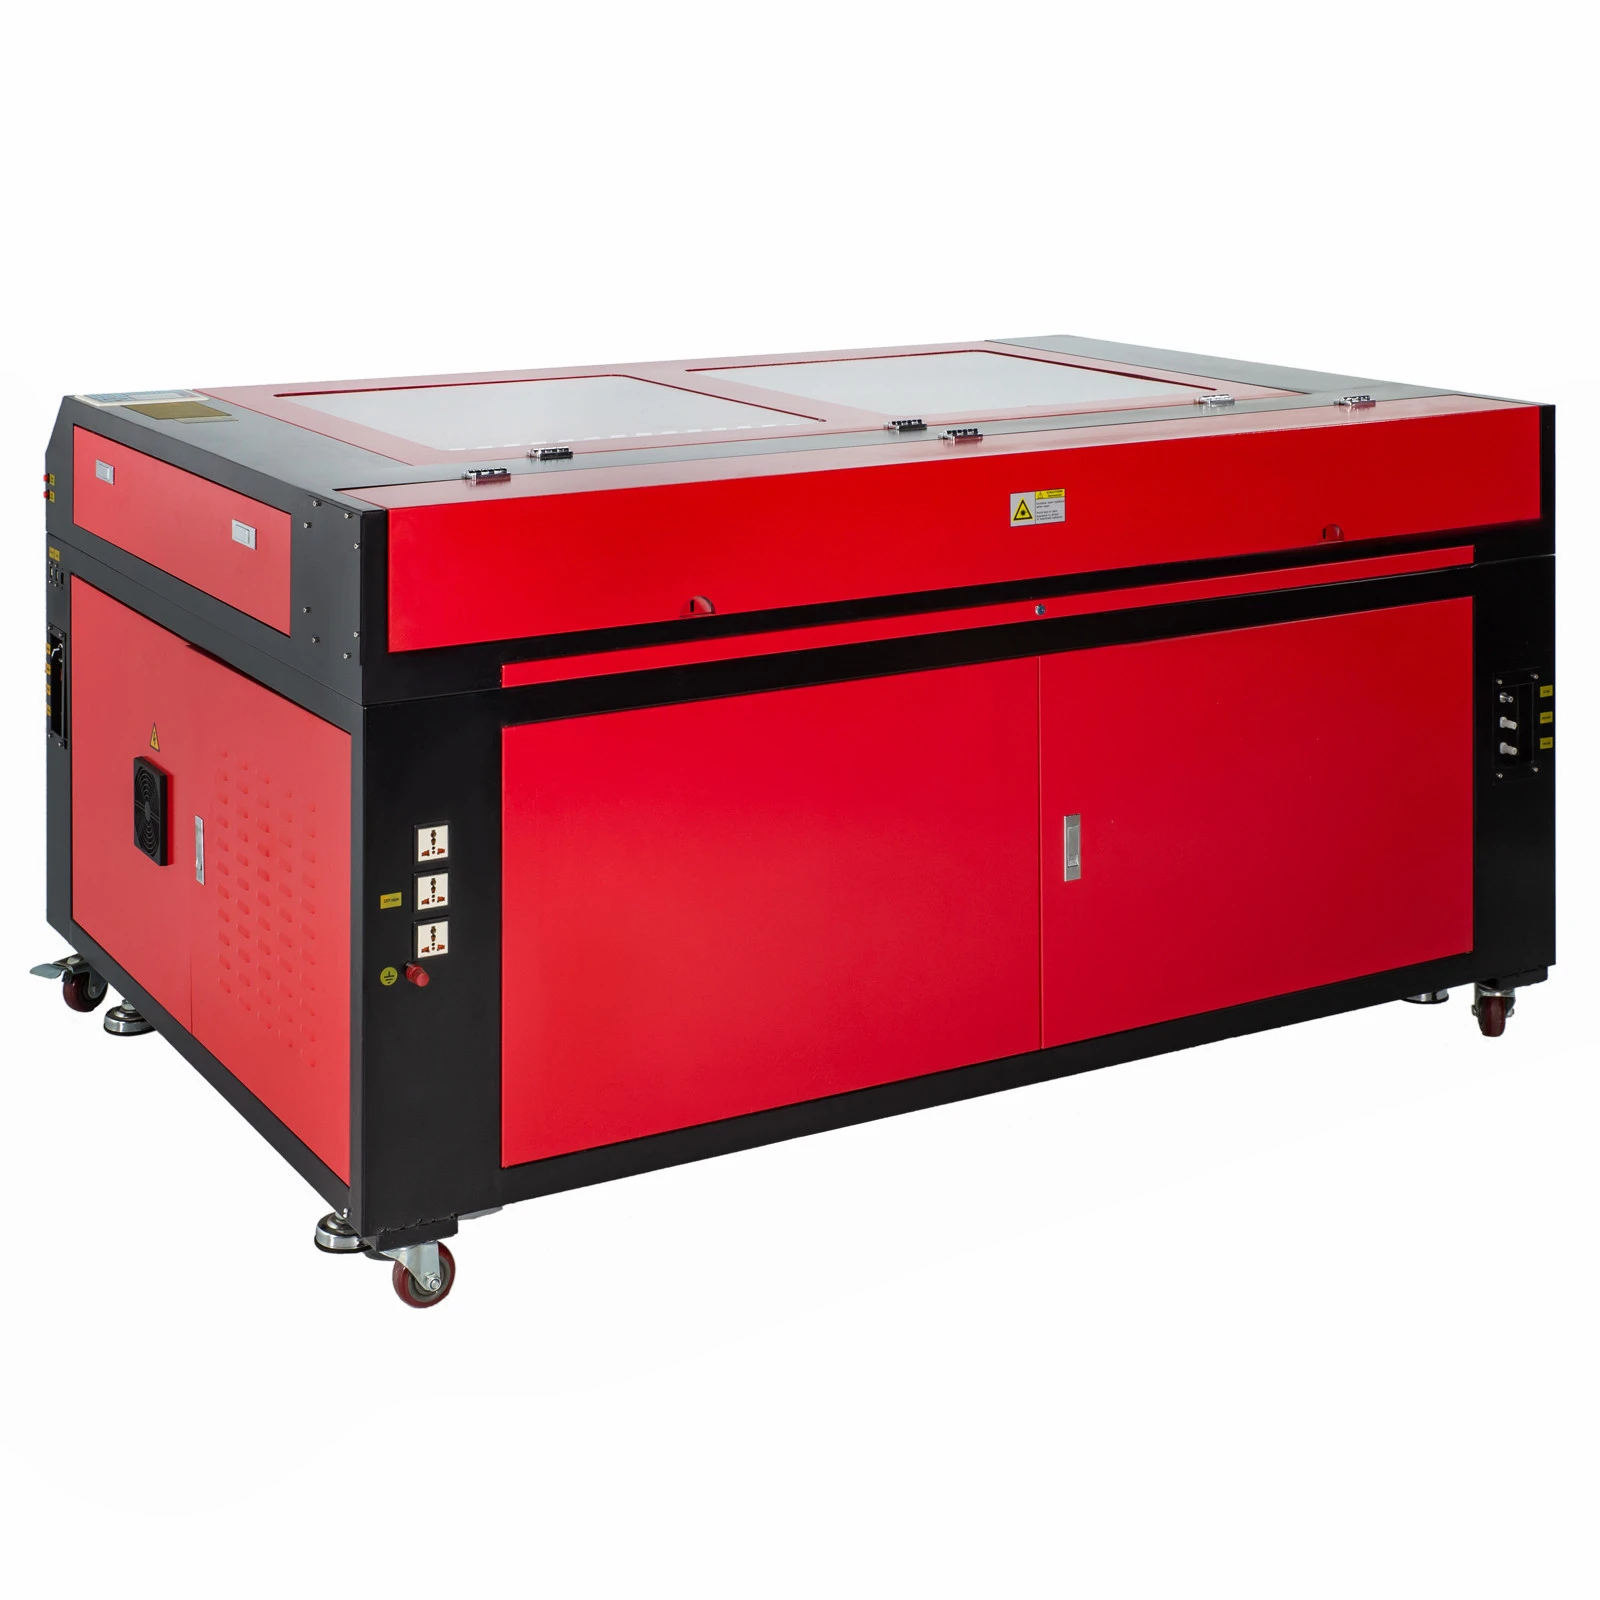 130w laser engraving machine co2 for cutting wood plexiglass plastic leather rubber with best price